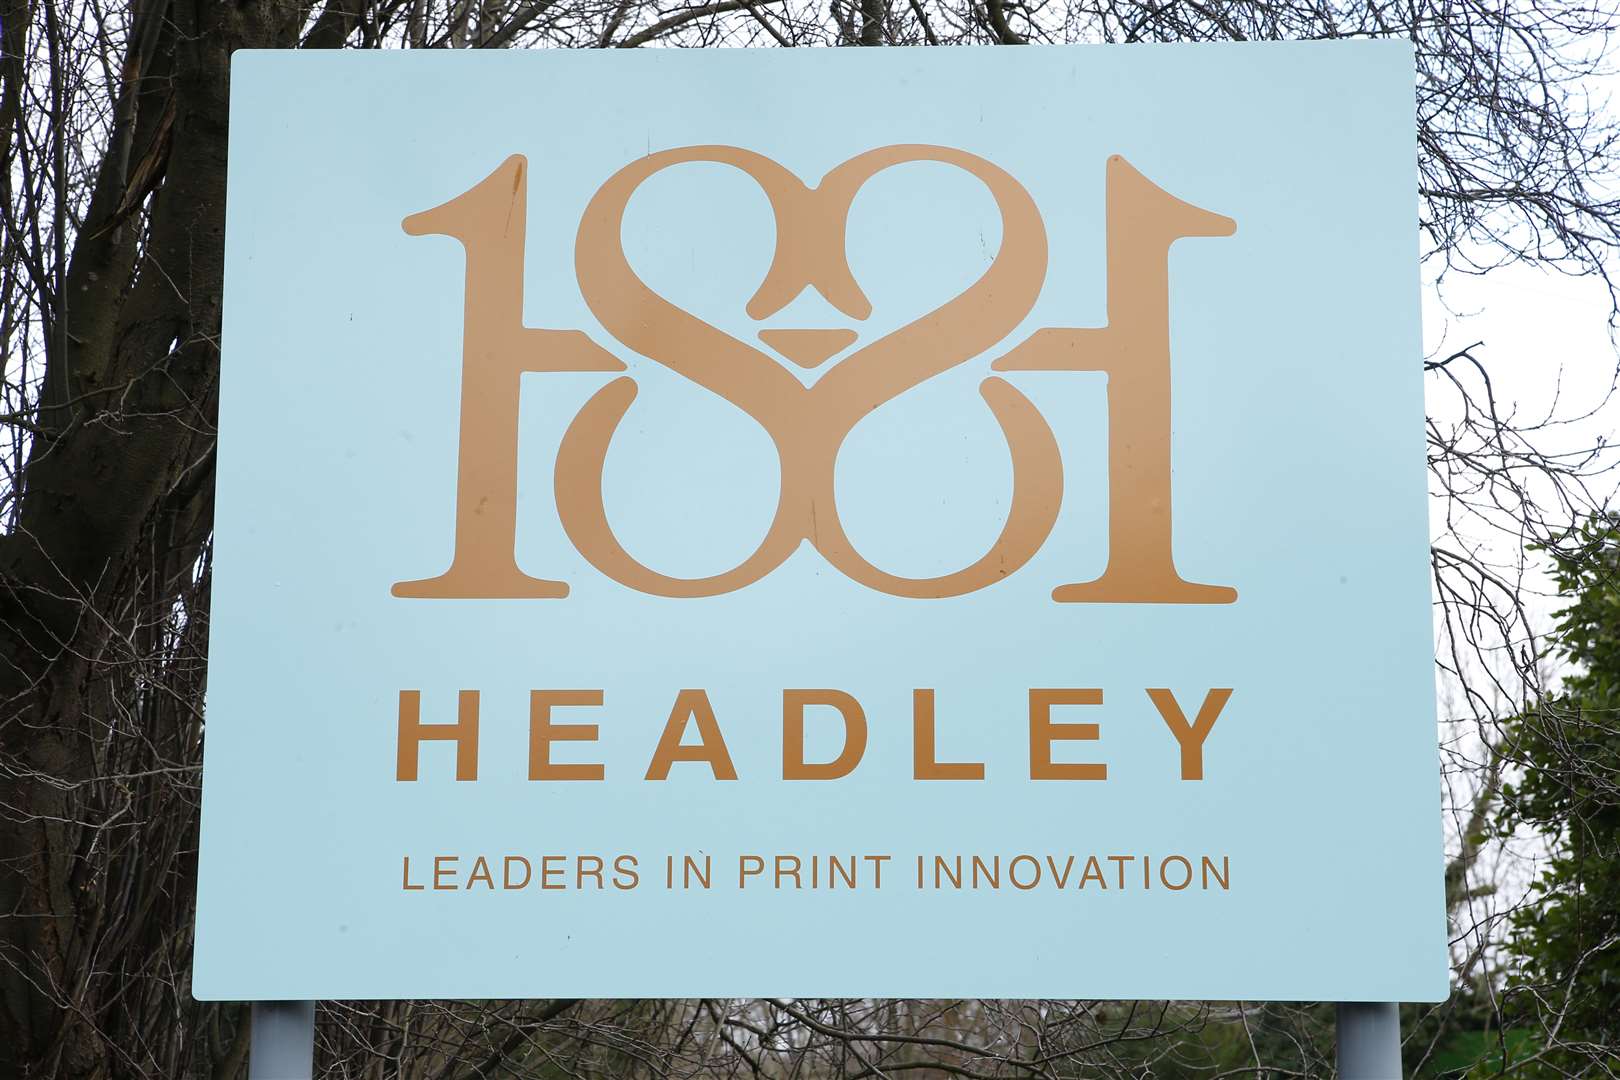 The Headley Brothers brand is due to disappear after 136 years